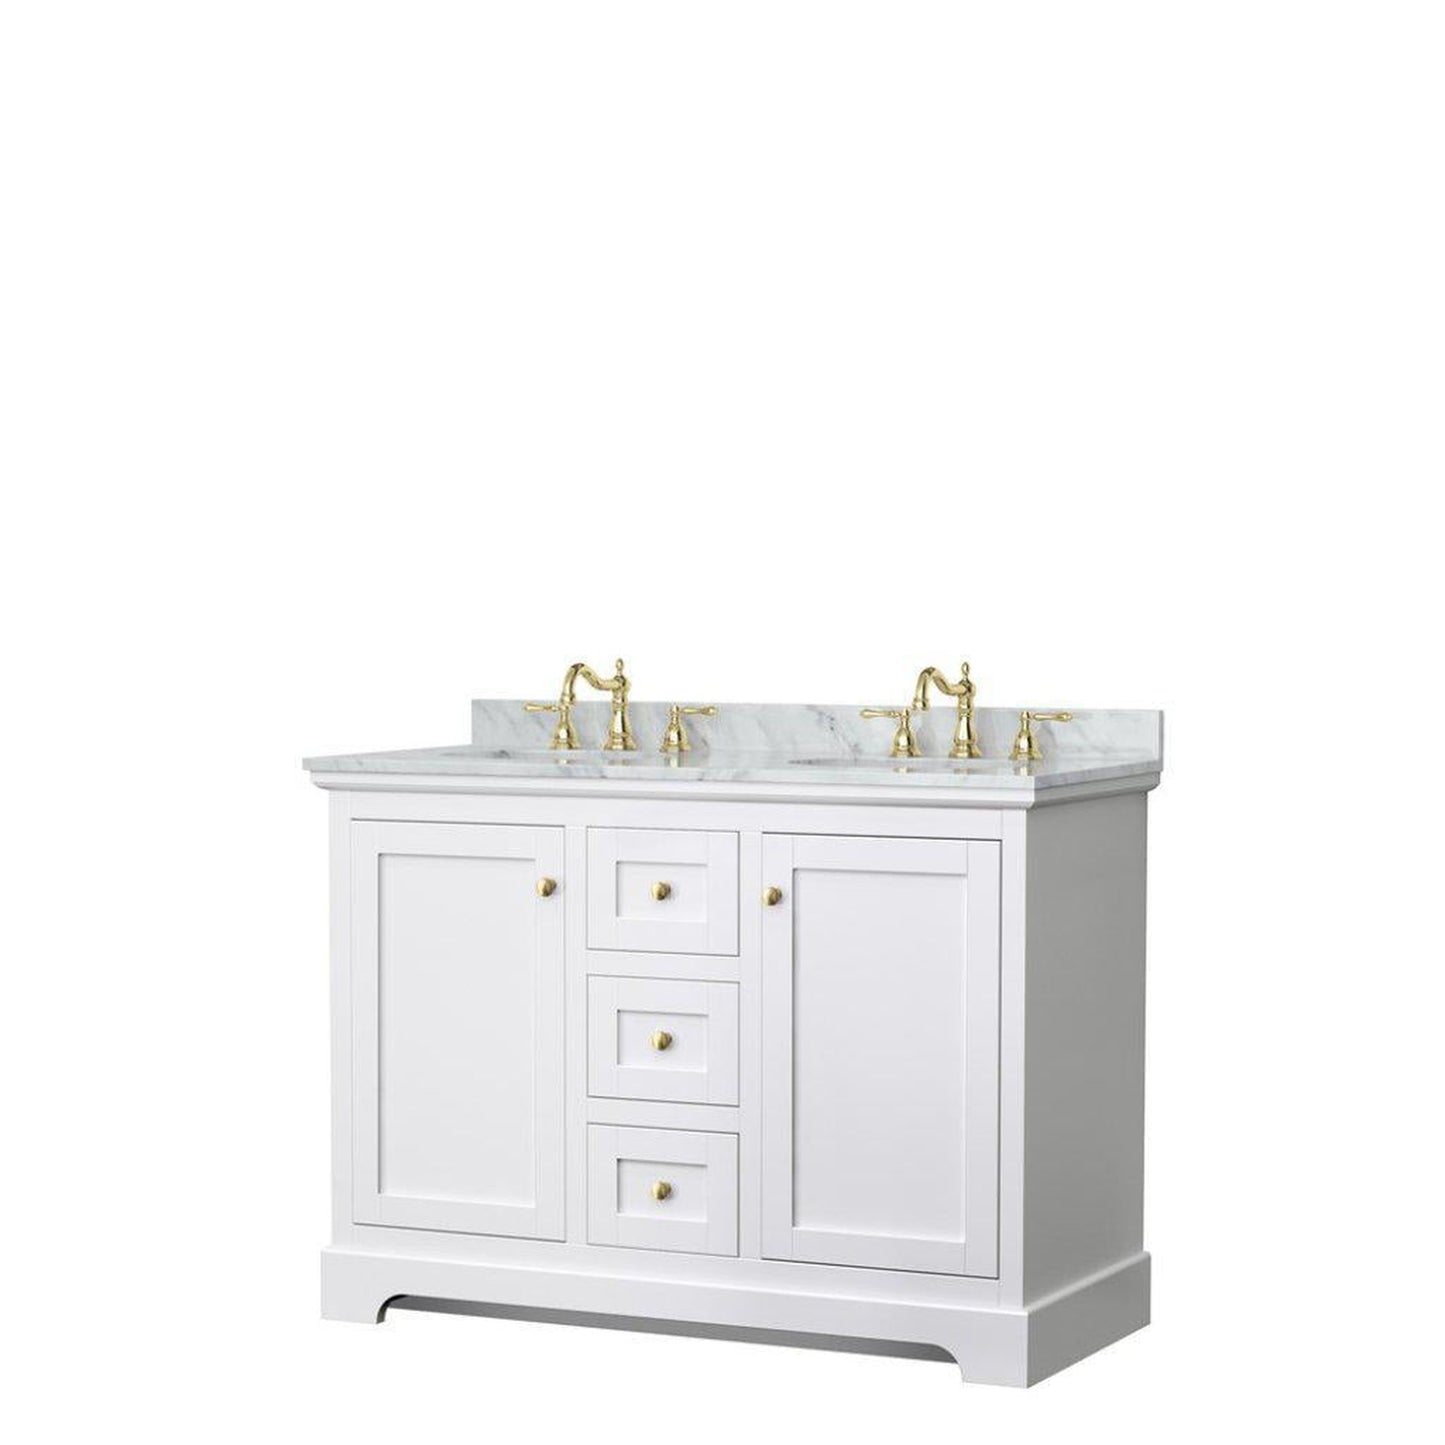 Wyndham Collection Avery 48" White Double Bathroom Vanity, White Carrara Marble Countertop With 3-Hole Faucet, 8" Oval Sink, Gold Trims